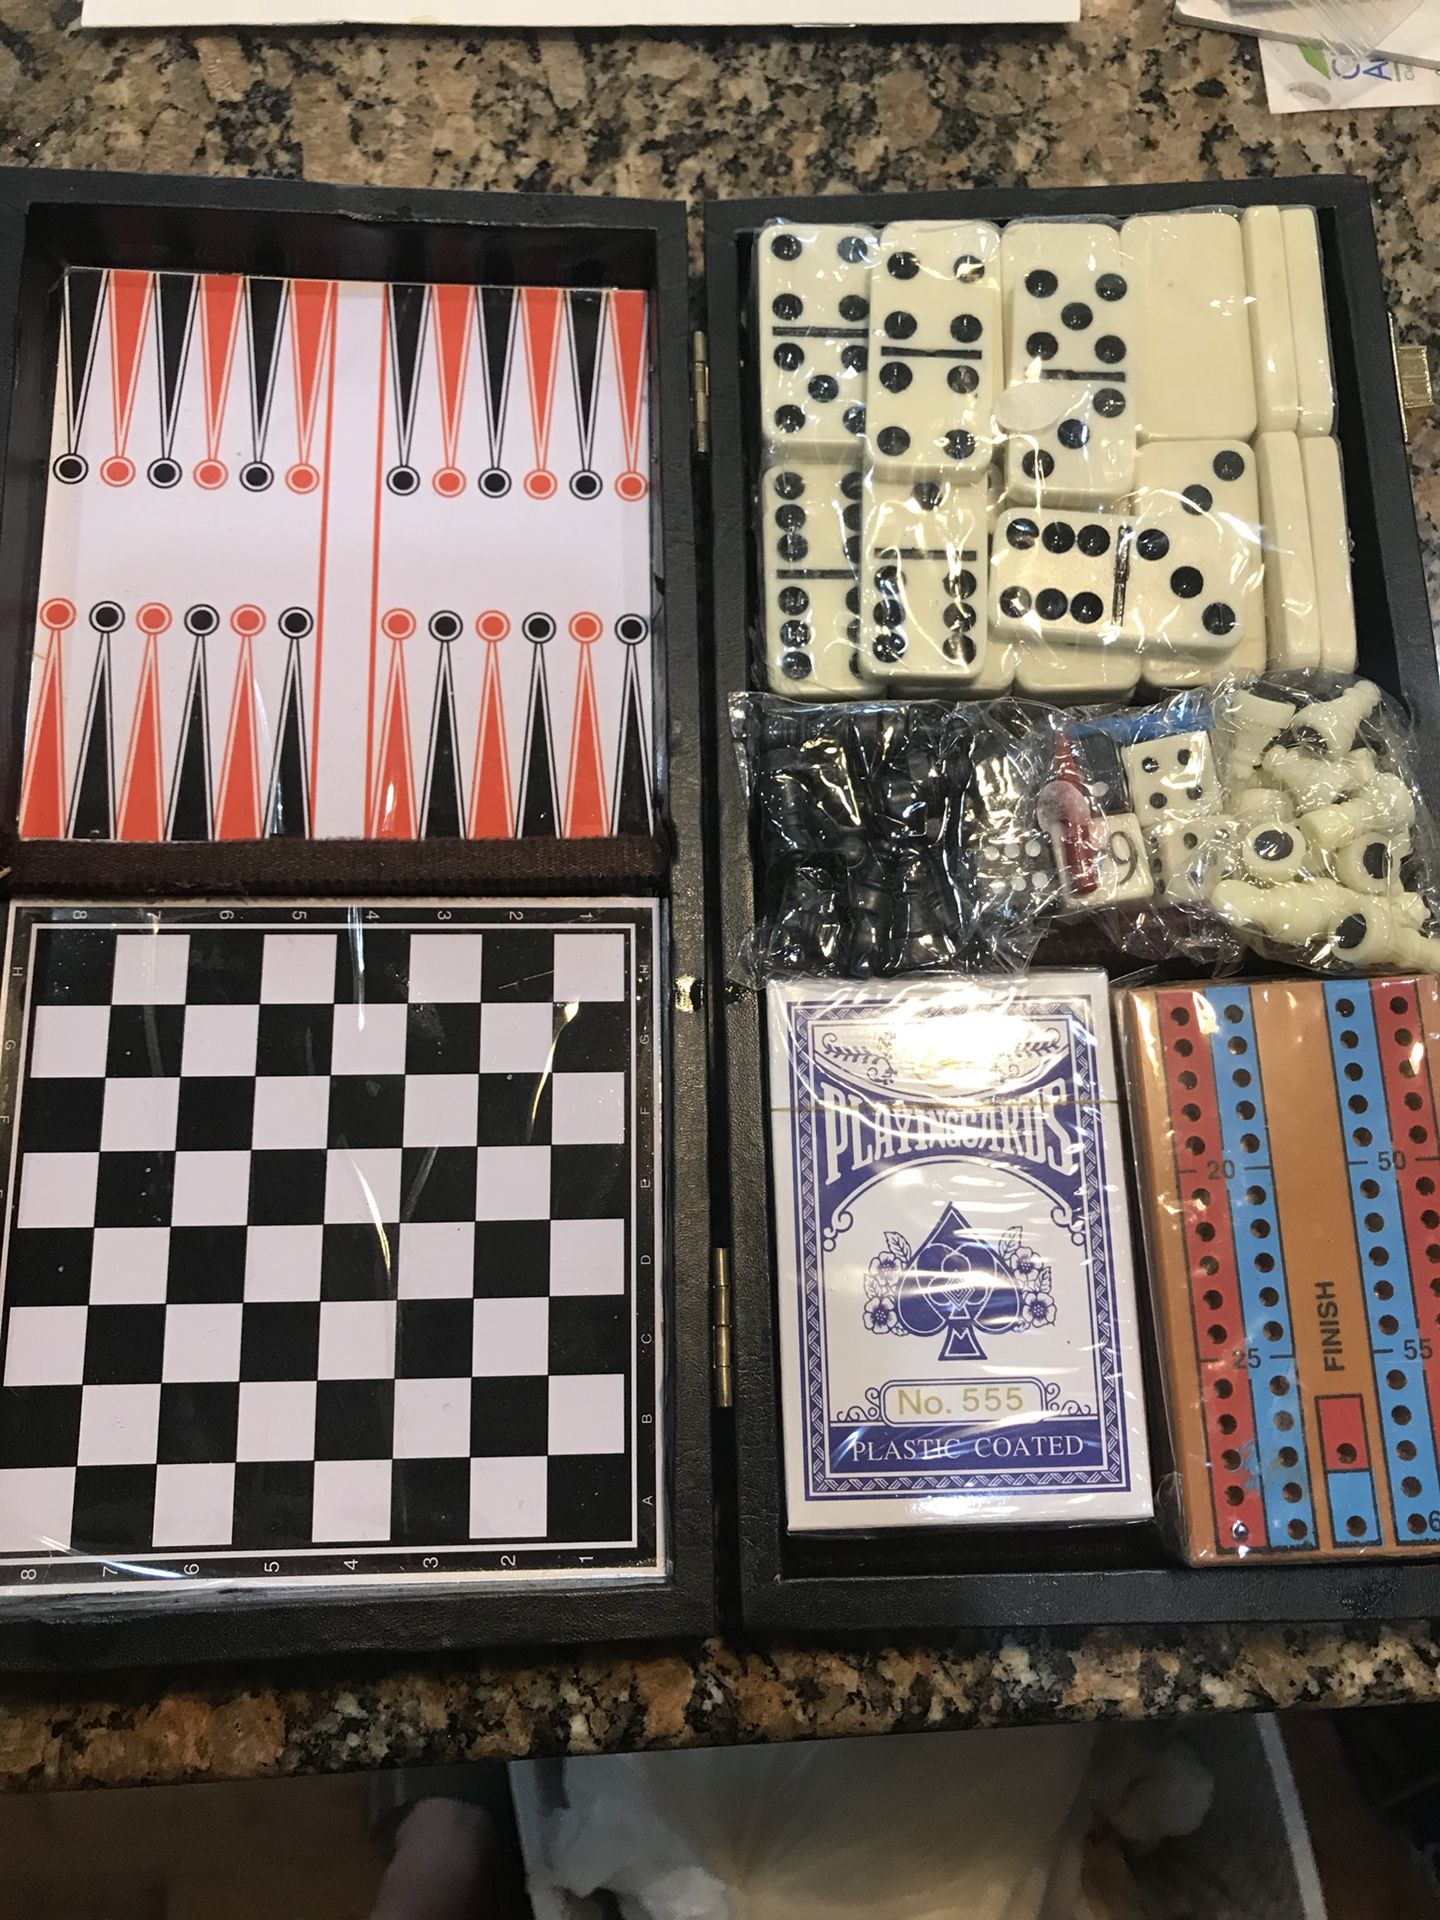 Compact checkers/chess/cribbage/backgammon/dominoes set